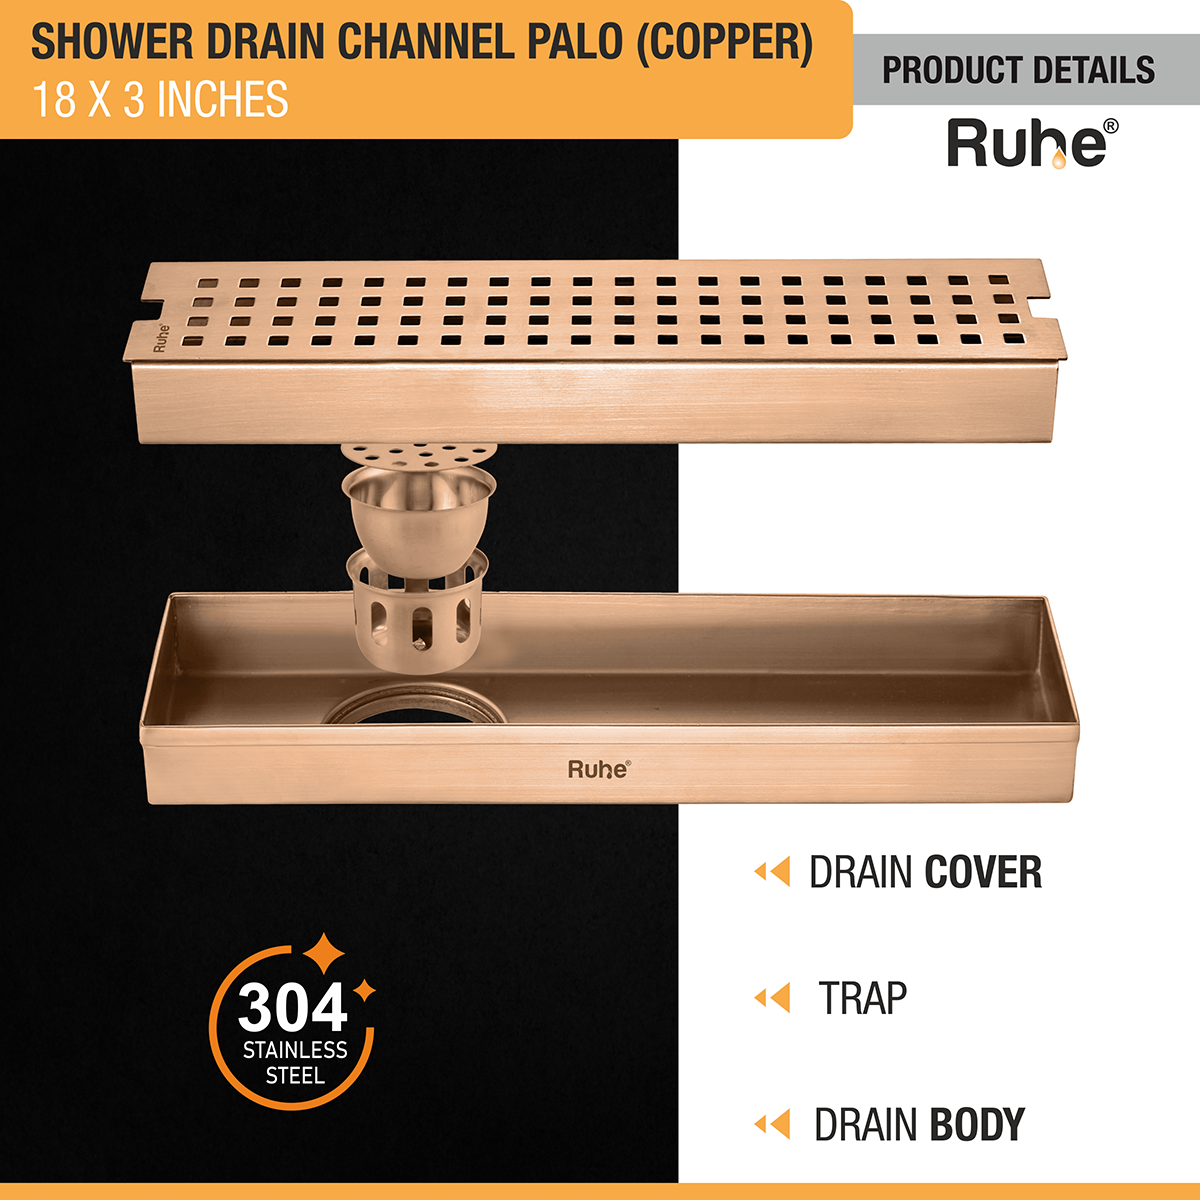 Palo Shower Drain Channel (18 x 3 Inches) ROSE GOLD/ANTIQUE COPPER product details